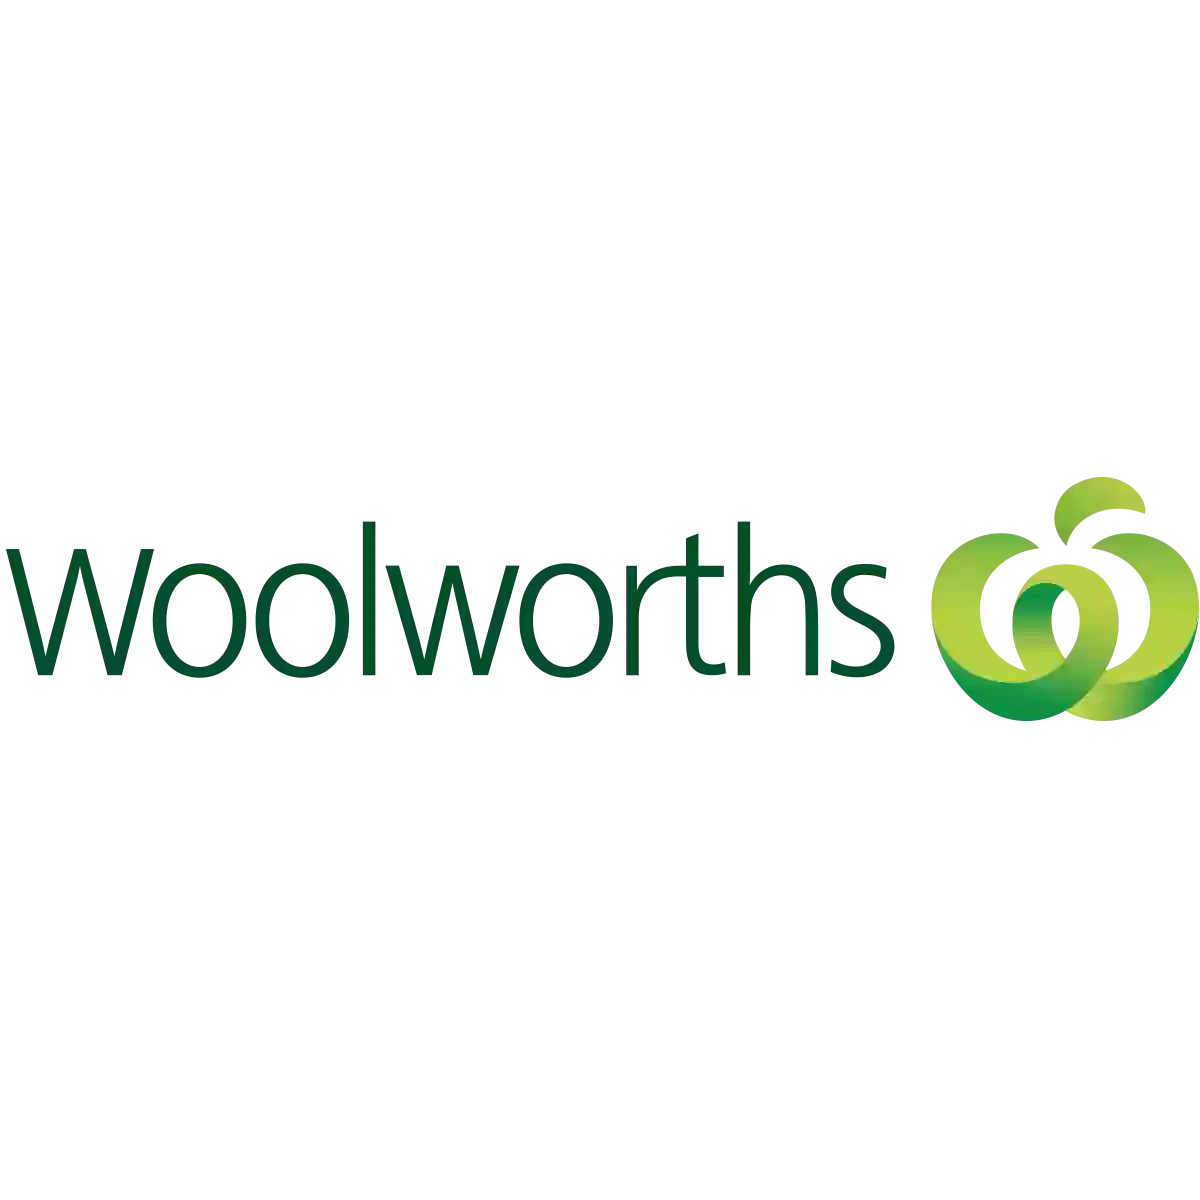 Woolworths Melbourne Square (Southbank)